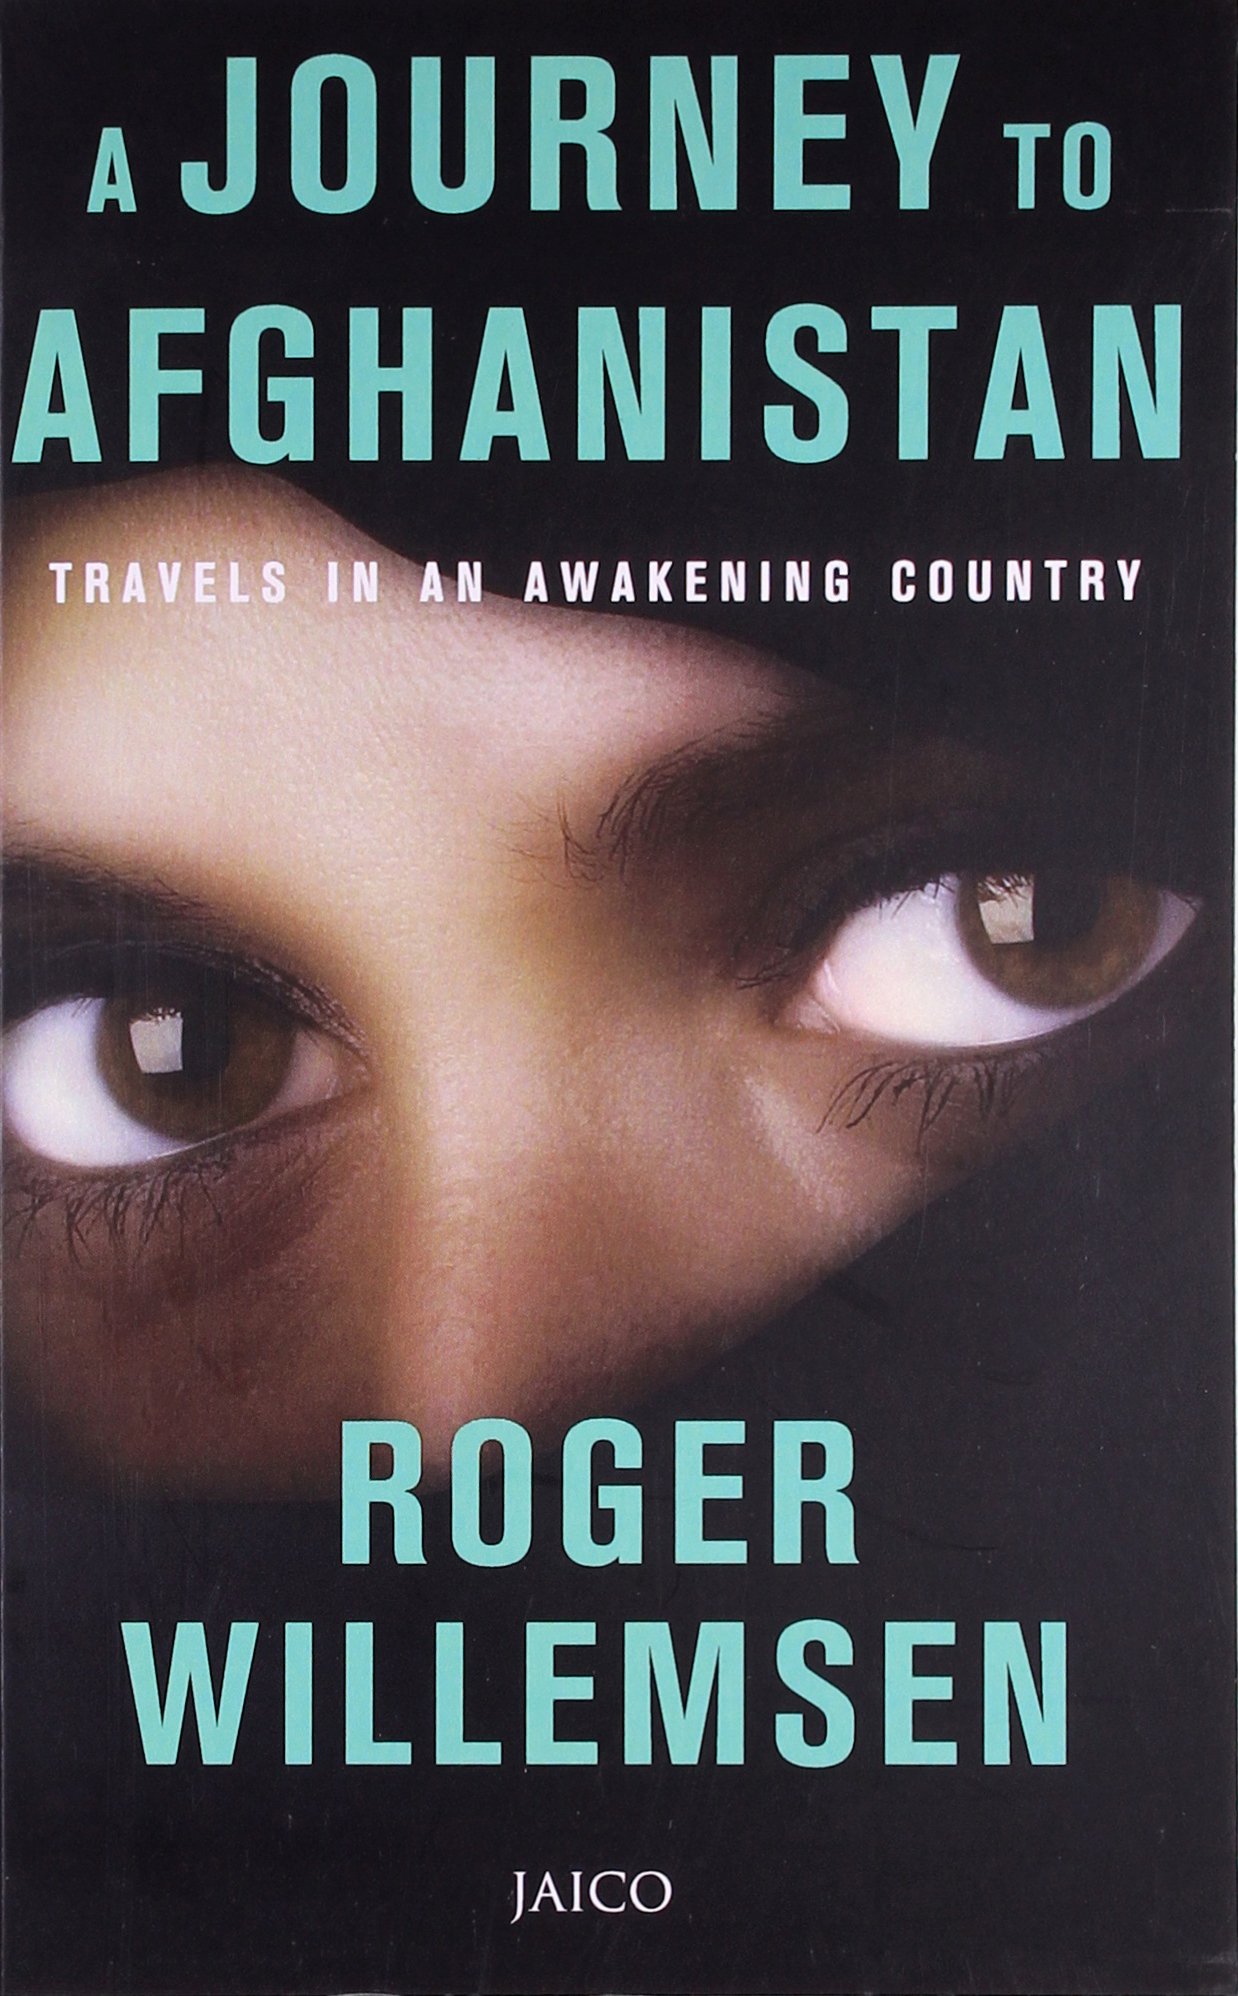 A Journey To Afghanistan